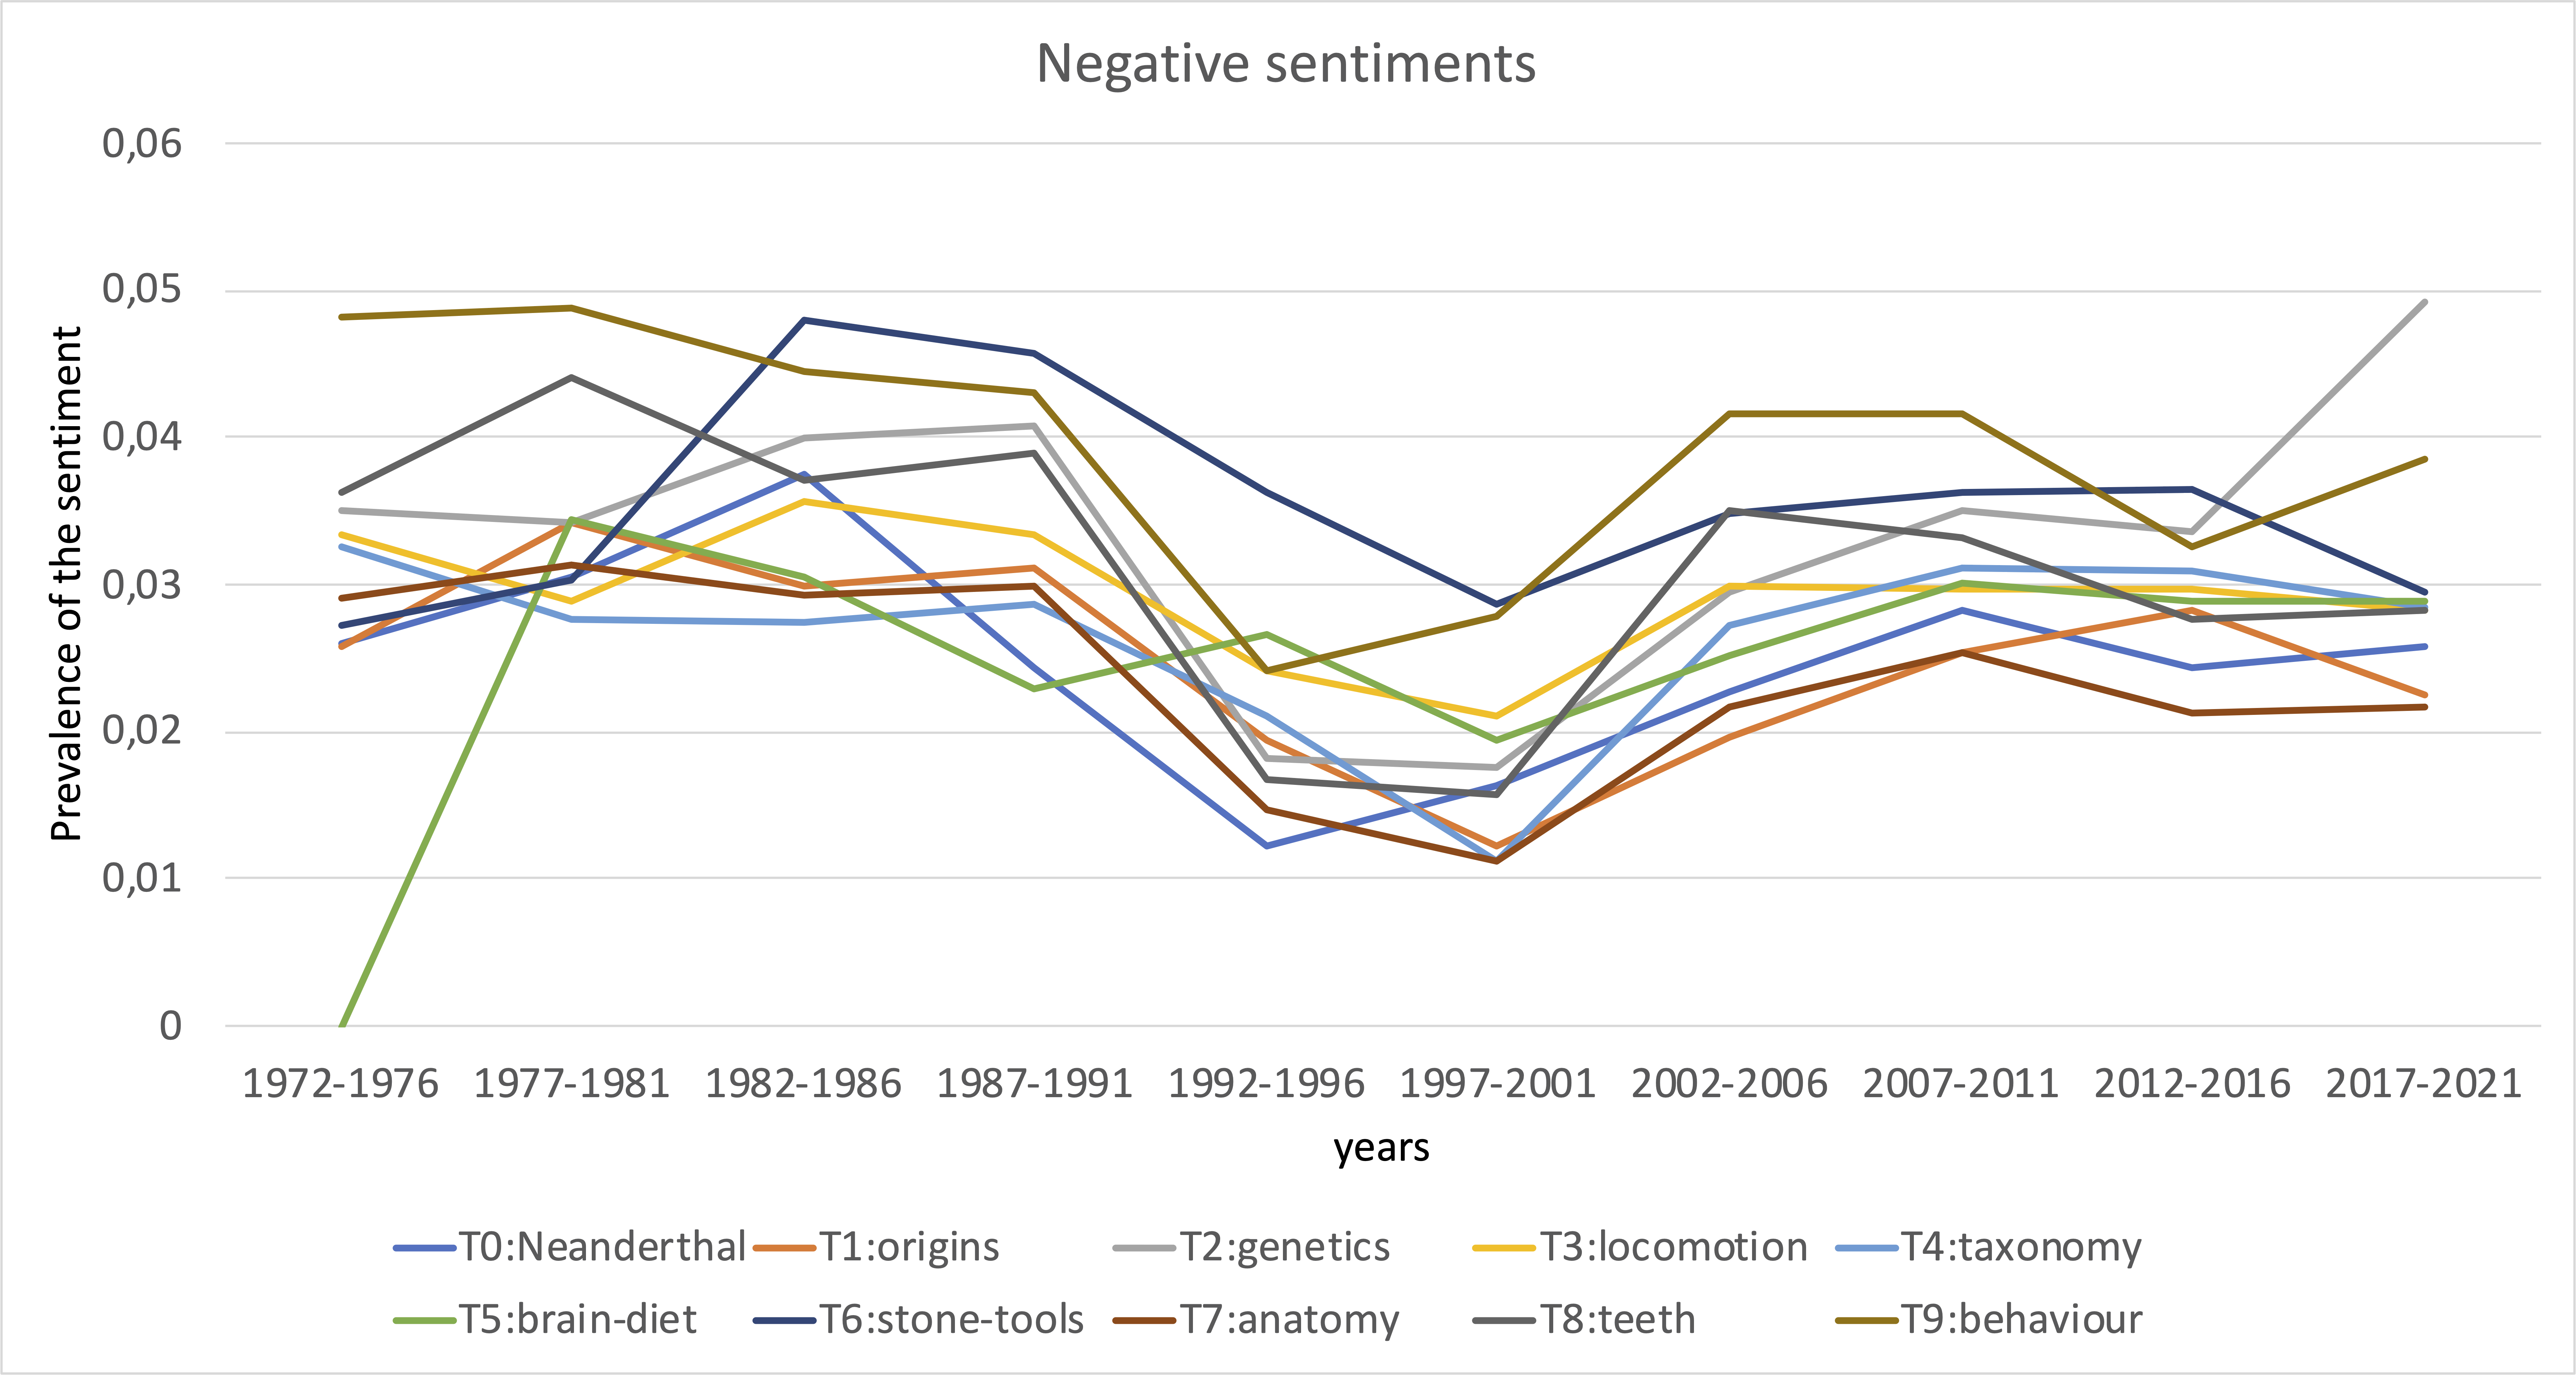 Prevalence of negative sentiments over the years